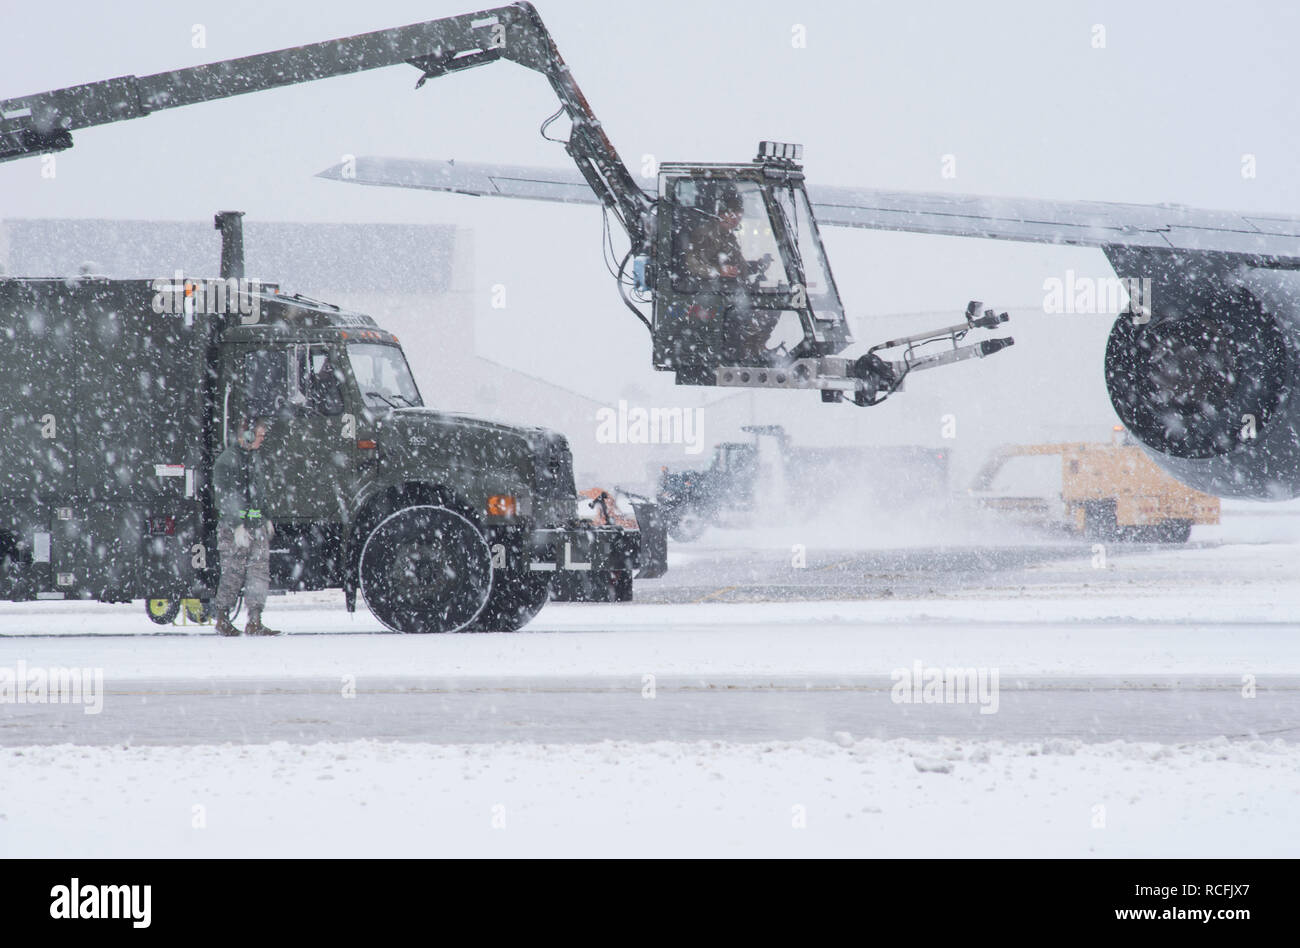 Airmen from the 108th Maintenance Group prepare to de-ice a KC-135R Stratotanker on the flightline at Joint Base McGuire-Dix-Lakehurst, N.J., Jan. 13, 2019. Snow removal from the flightline and deicing of aircraft are very important for maintaining the unit's aircraft and mission readiness. (U.S. Air National Guard photo by Senior Julia Santiago) Stock Photo